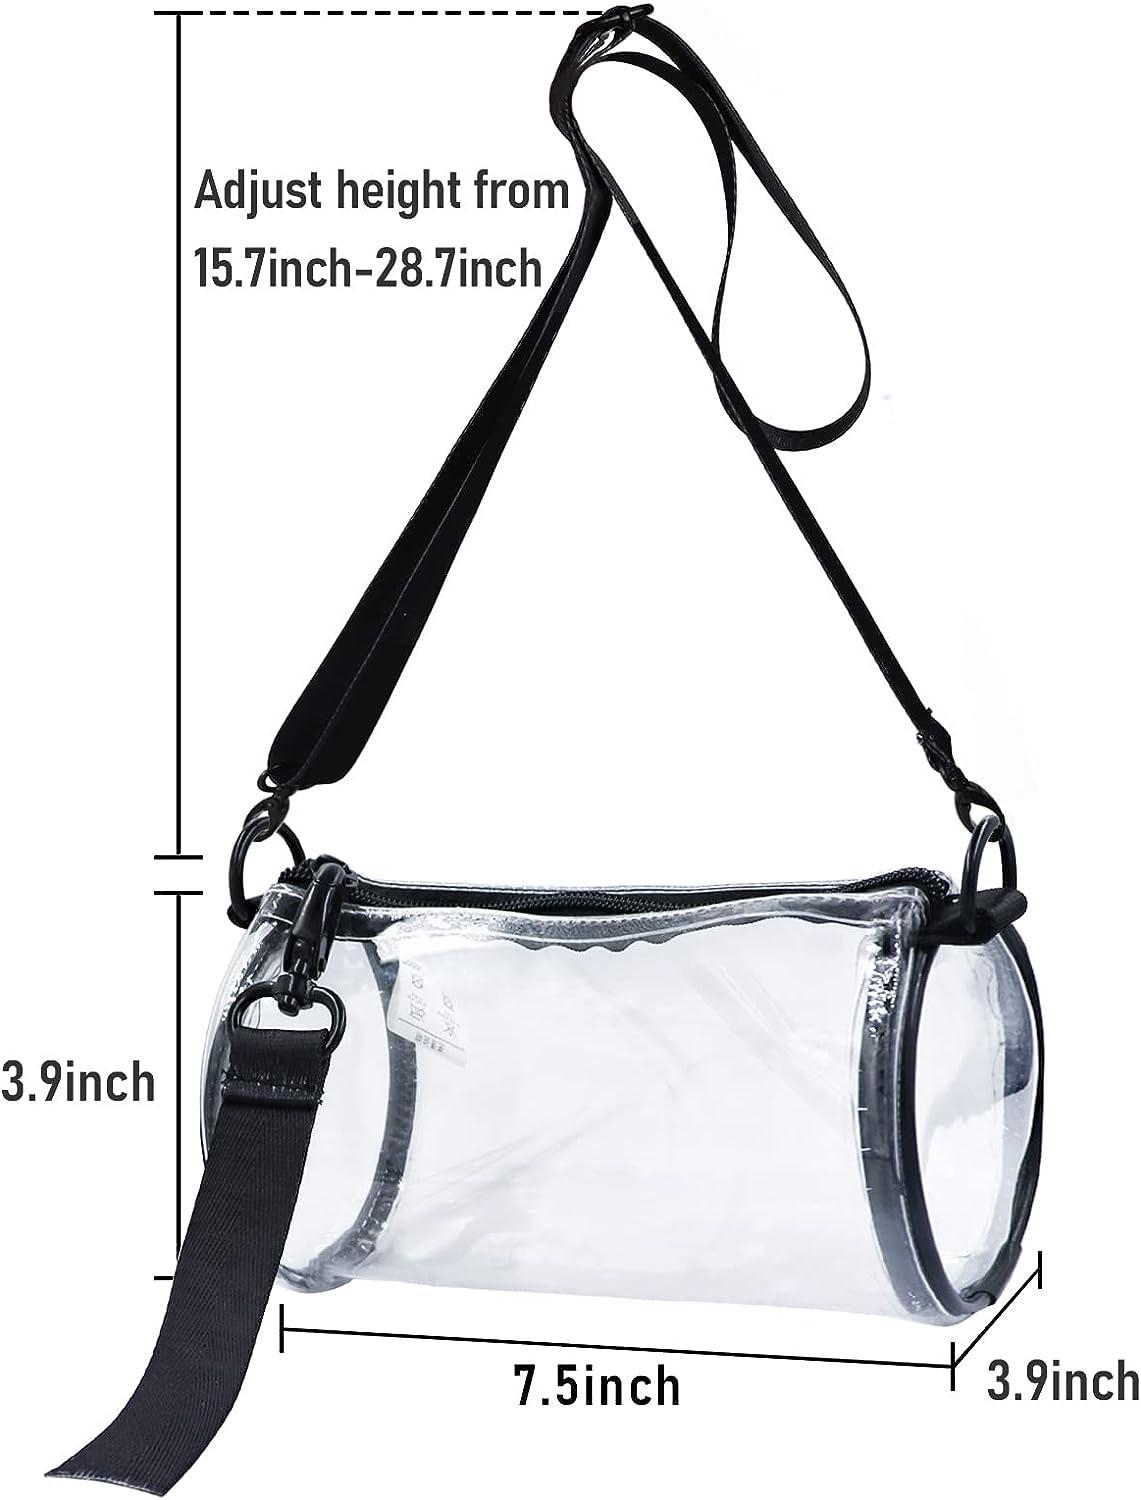 Clear Bag Stadium Approved, Clear Purse, Clear Bags for Women, Clear Crossbody Clear Stadium Bags for Women Small Clear Purse Stadium PVC Handbag